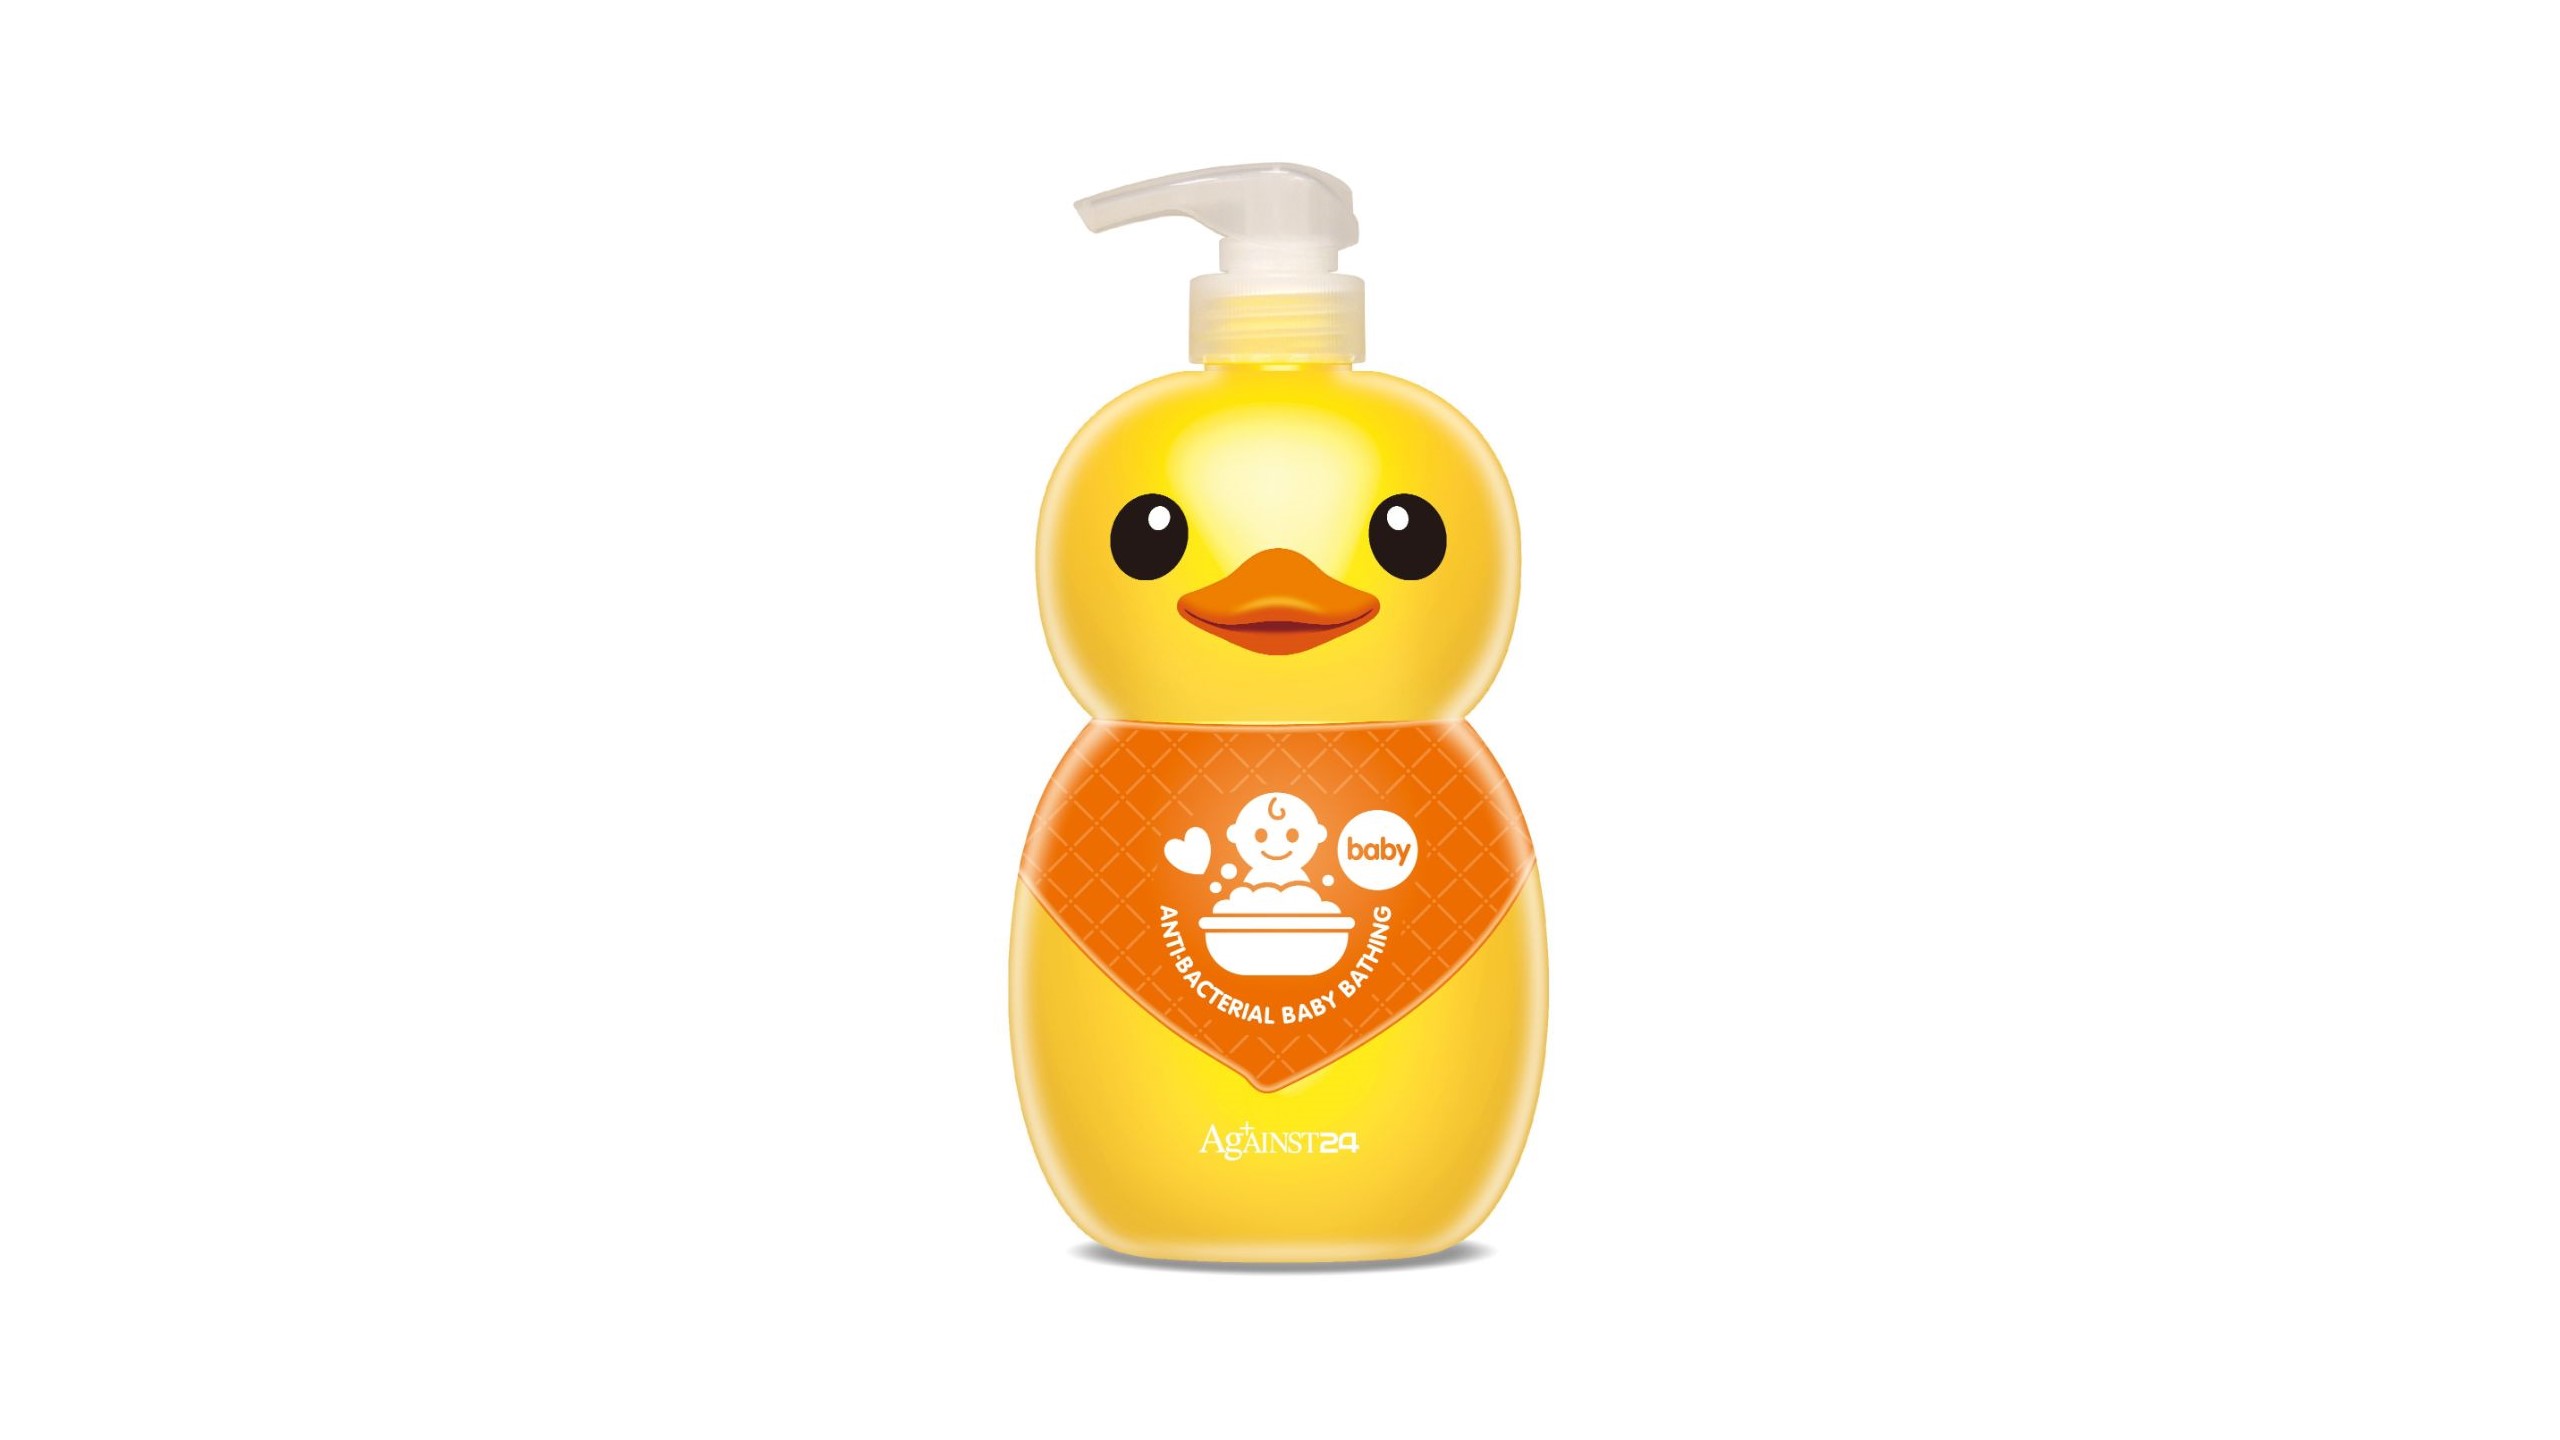 Against24 Rubber Duck Anti-Bacterial Baby Bathing 1L